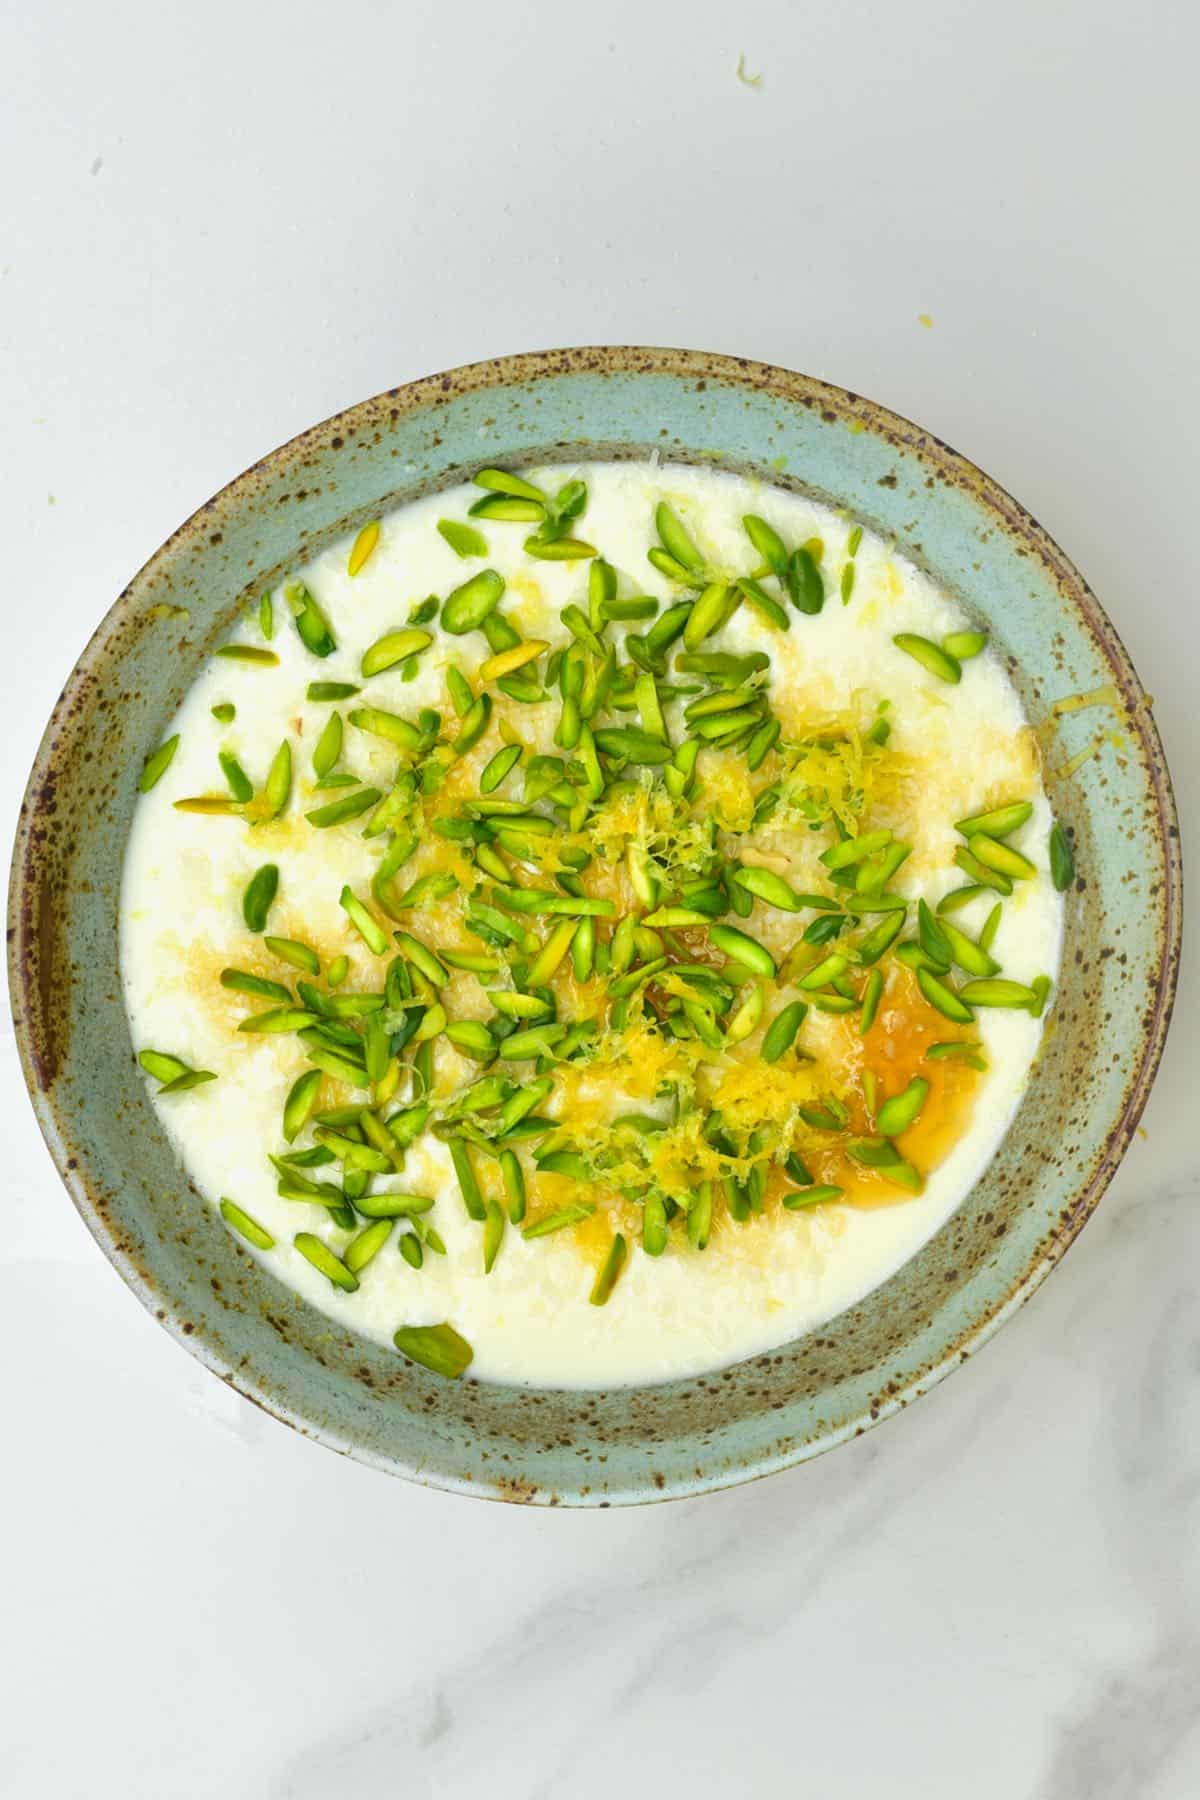 Milk ginger pudding in a bowl topped with pistachios and lemon zest